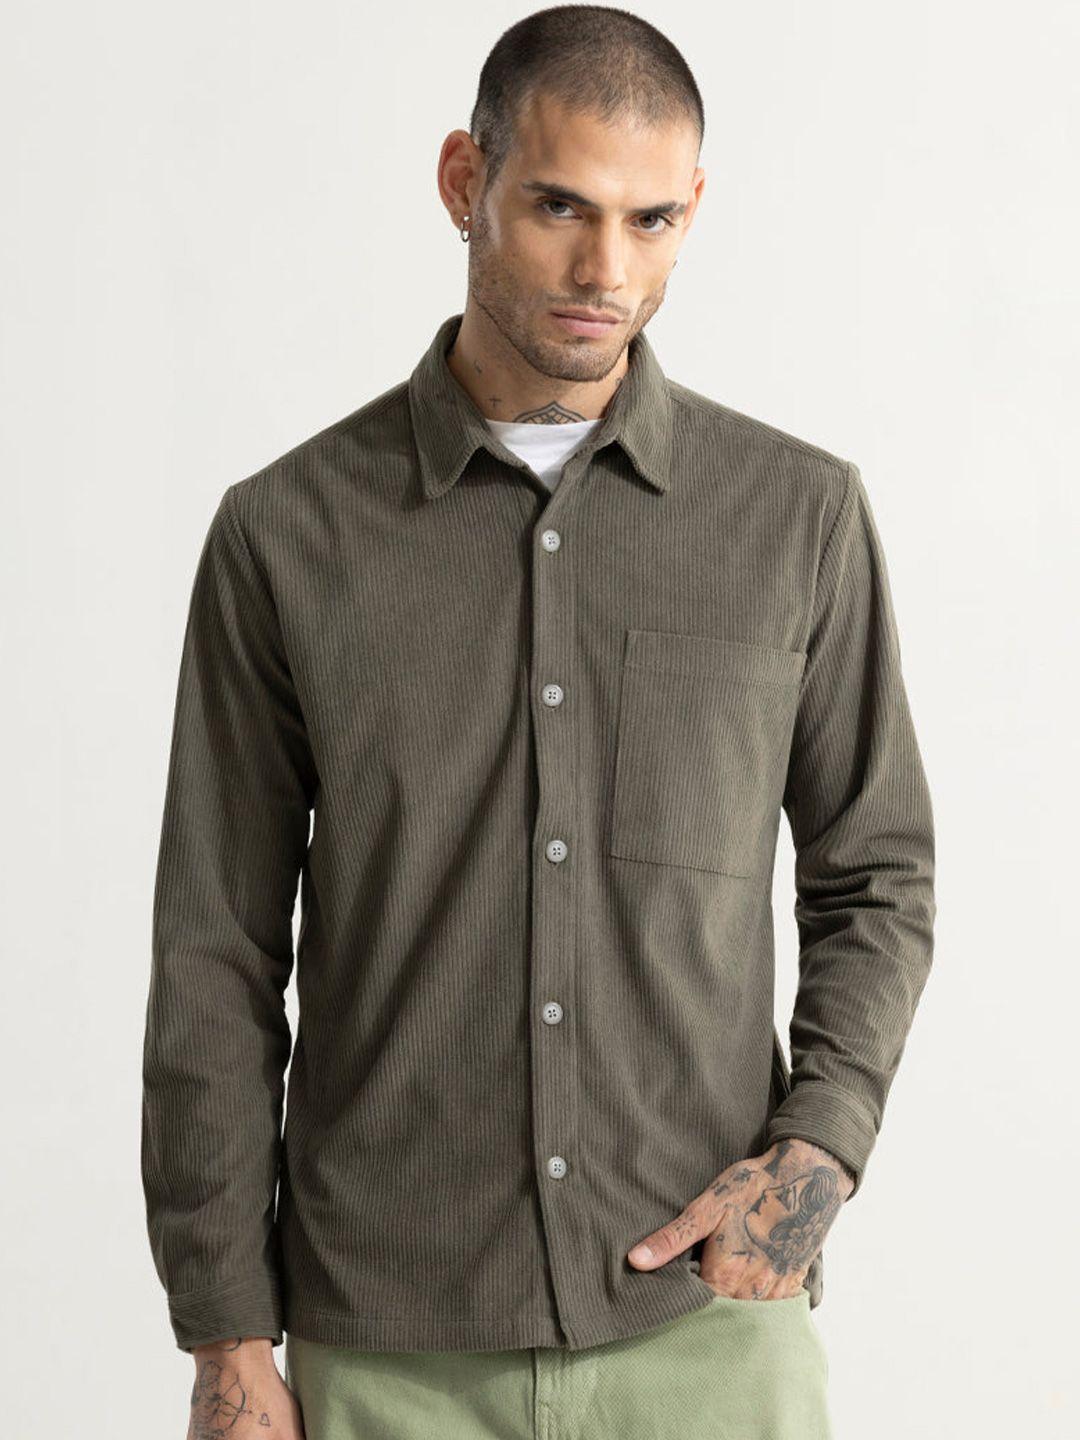 snitch-olive-green-classic-textured-spread-collar-long-sleeves-casual-shirt